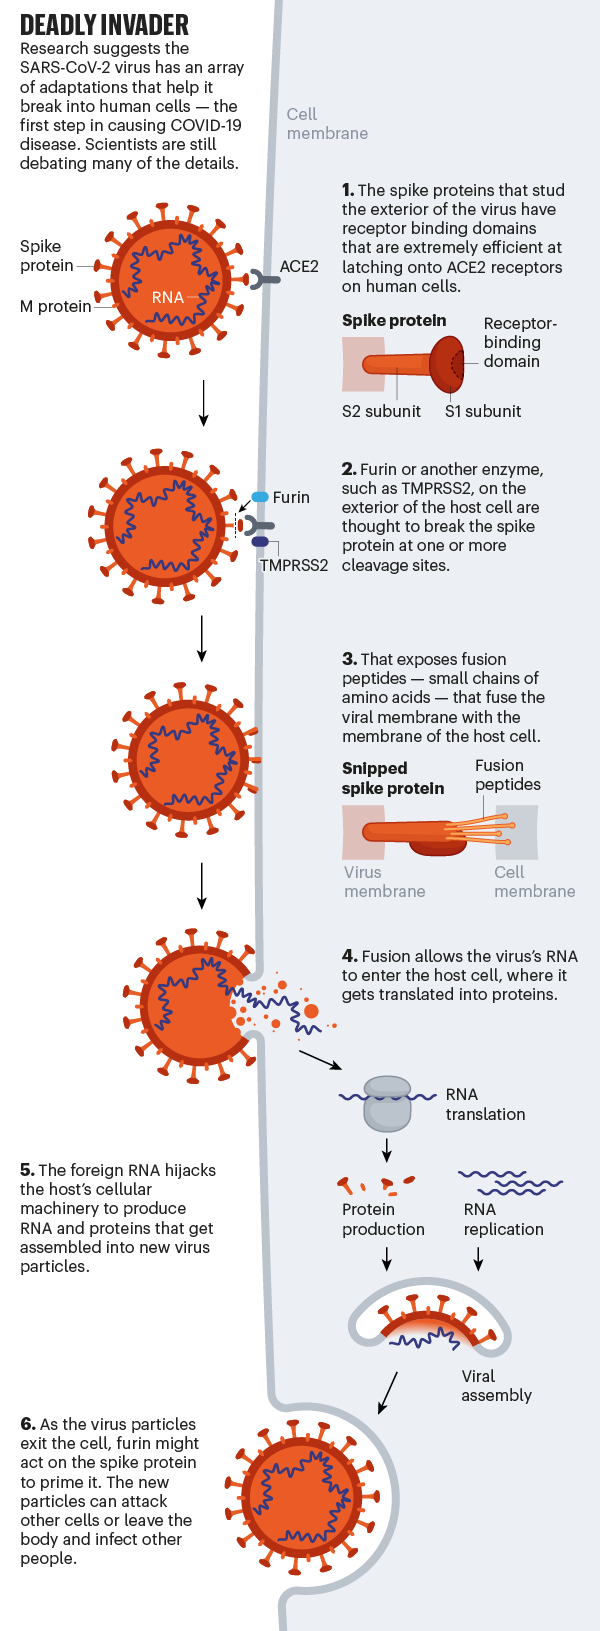 Deadly invader. Graphic showing SARS-CoV-2 infecting a human cell.